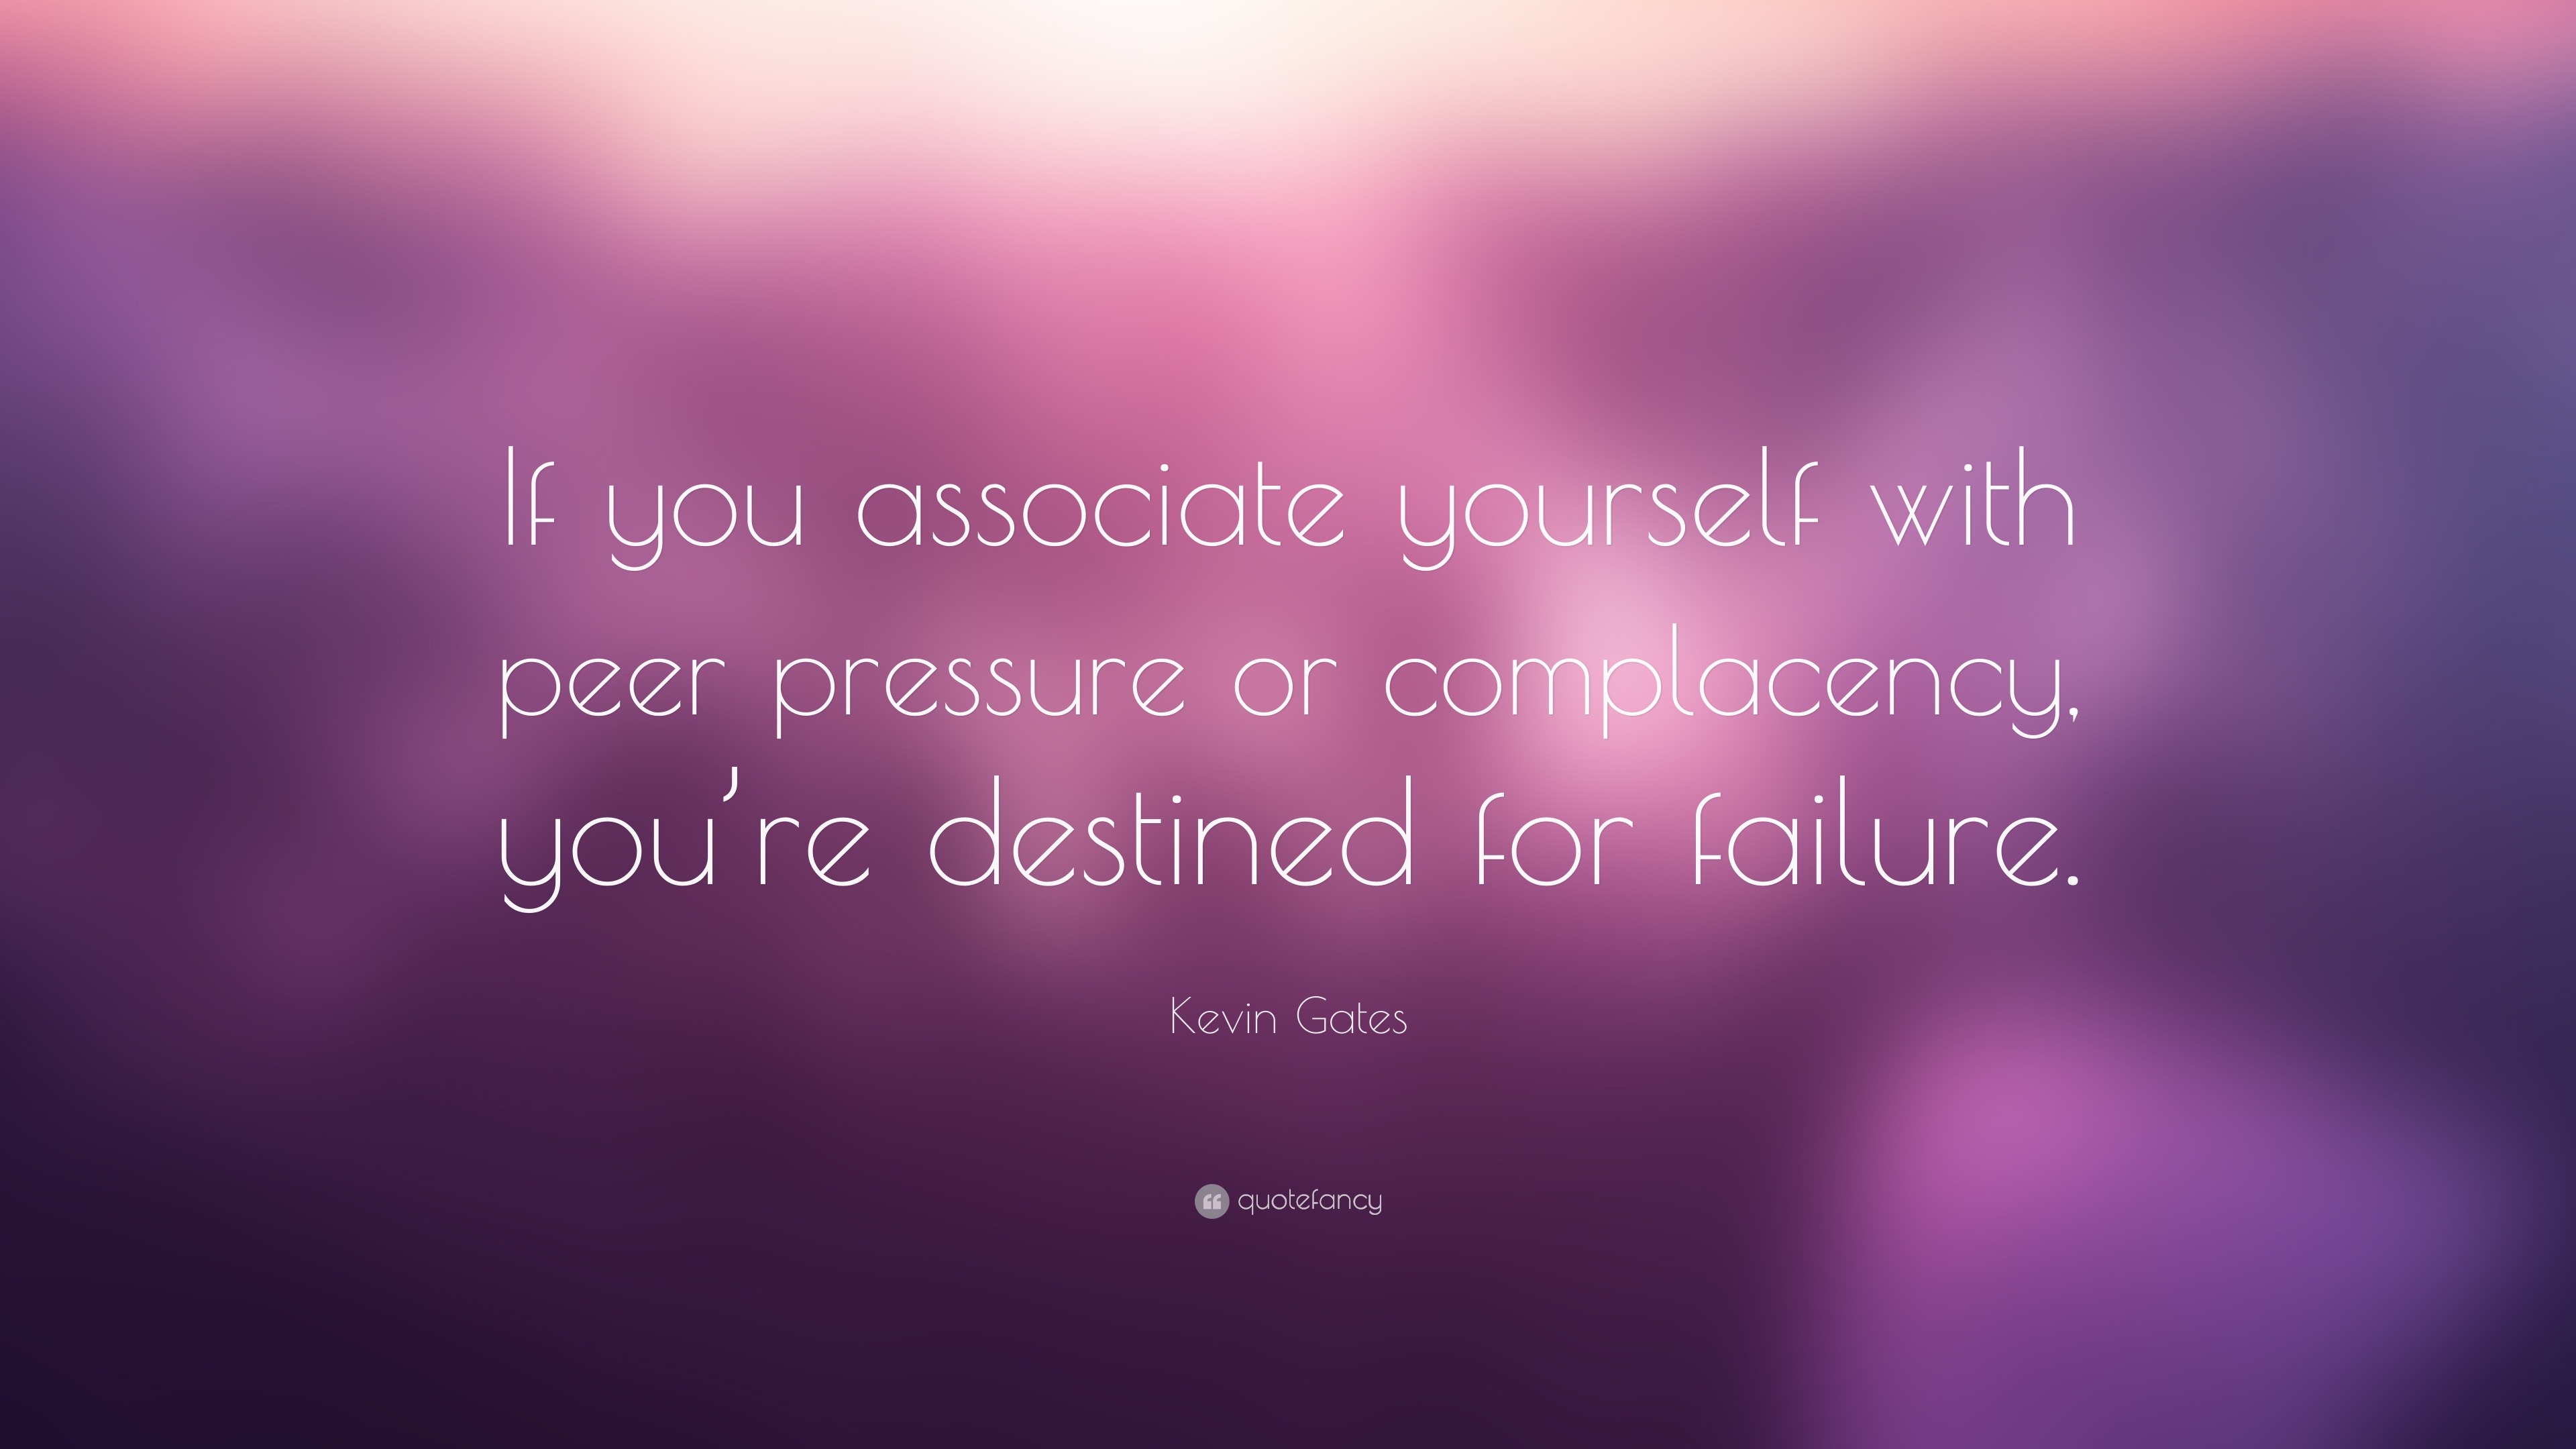 Kevin Gates Quote: “If you associate yourself with peer pressure or ...